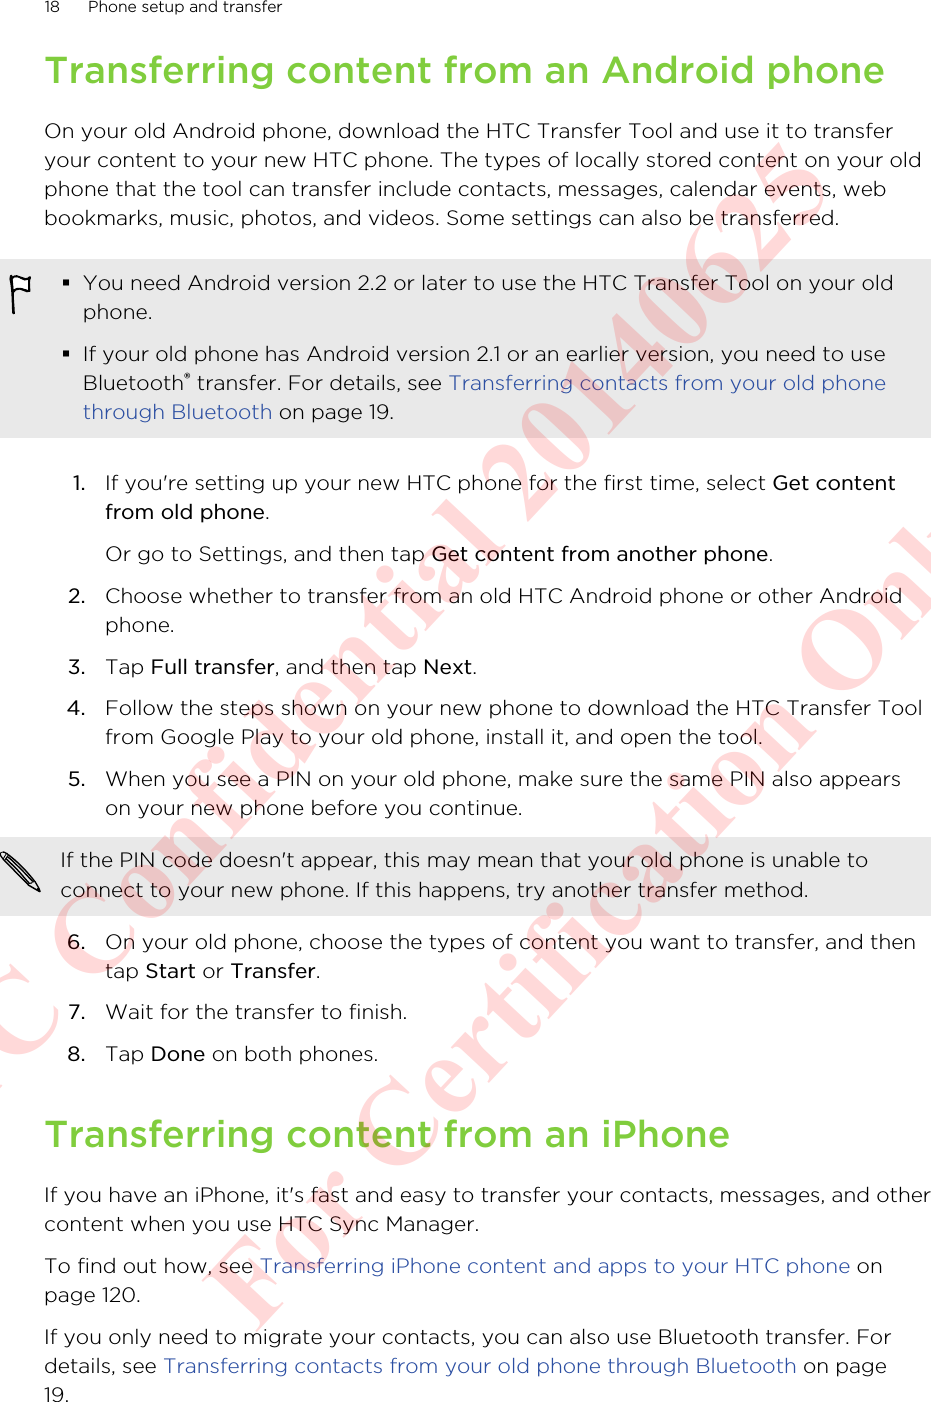 Transferring content from an Android phoneOn your old Android phone, download the HTC Transfer Tool and use it to transferyour content to your new HTC phone. The types of locally stored content on your oldphone that the tool can transfer include contacts, messages, calendar events, webbookmarks, music, photos, and videos. Some settings can also be transferred.§You need Android version 2.2 or later to use the HTC Transfer Tool on your oldphone.§If your old phone has Android version 2.1 or an earlier version, you need to useBluetooth® transfer. For details, see Transferring contacts from your old phonethrough Bluetooth on page 19.1. If you&apos;re setting up your new HTC phone for the first time, select Get contentfrom old phone. Or go to Settings, and then tap Get content from another phone.2. Choose whether to transfer from an old HTC Android phone or other Androidphone.3. Tap Full transfer, and then tap Next.4. Follow the steps shown on your new phone to download the HTC Transfer Toolfrom Google Play to your old phone, install it, and open the tool.5. When you see a PIN on your old phone, make sure the same PIN also appearson your new phone before you continue. If the PIN code doesn&apos;t appear, this may mean that your old phone is unable toconnect to your new phone. If this happens, try another transfer method.6. On your old phone, choose the types of content you want to transfer, and thentap Start or Transfer.7. Wait for the transfer to finish.8. Tap Done on both phones.Transferring content from an iPhoneIf you have an iPhone, it&apos;s fast and easy to transfer your contacts, messages, and othercontent when you use HTC Sync Manager.To find out how, see Transferring iPhone content and apps to your HTC phone onpage 120.If you only need to migrate your contacts, you can also use Bluetooth transfer. Fordetails, see Transferring contacts from your old phone through Bluetooth on page19.18 Phone setup and transferHTC Confidential 20140625  For Certification Only